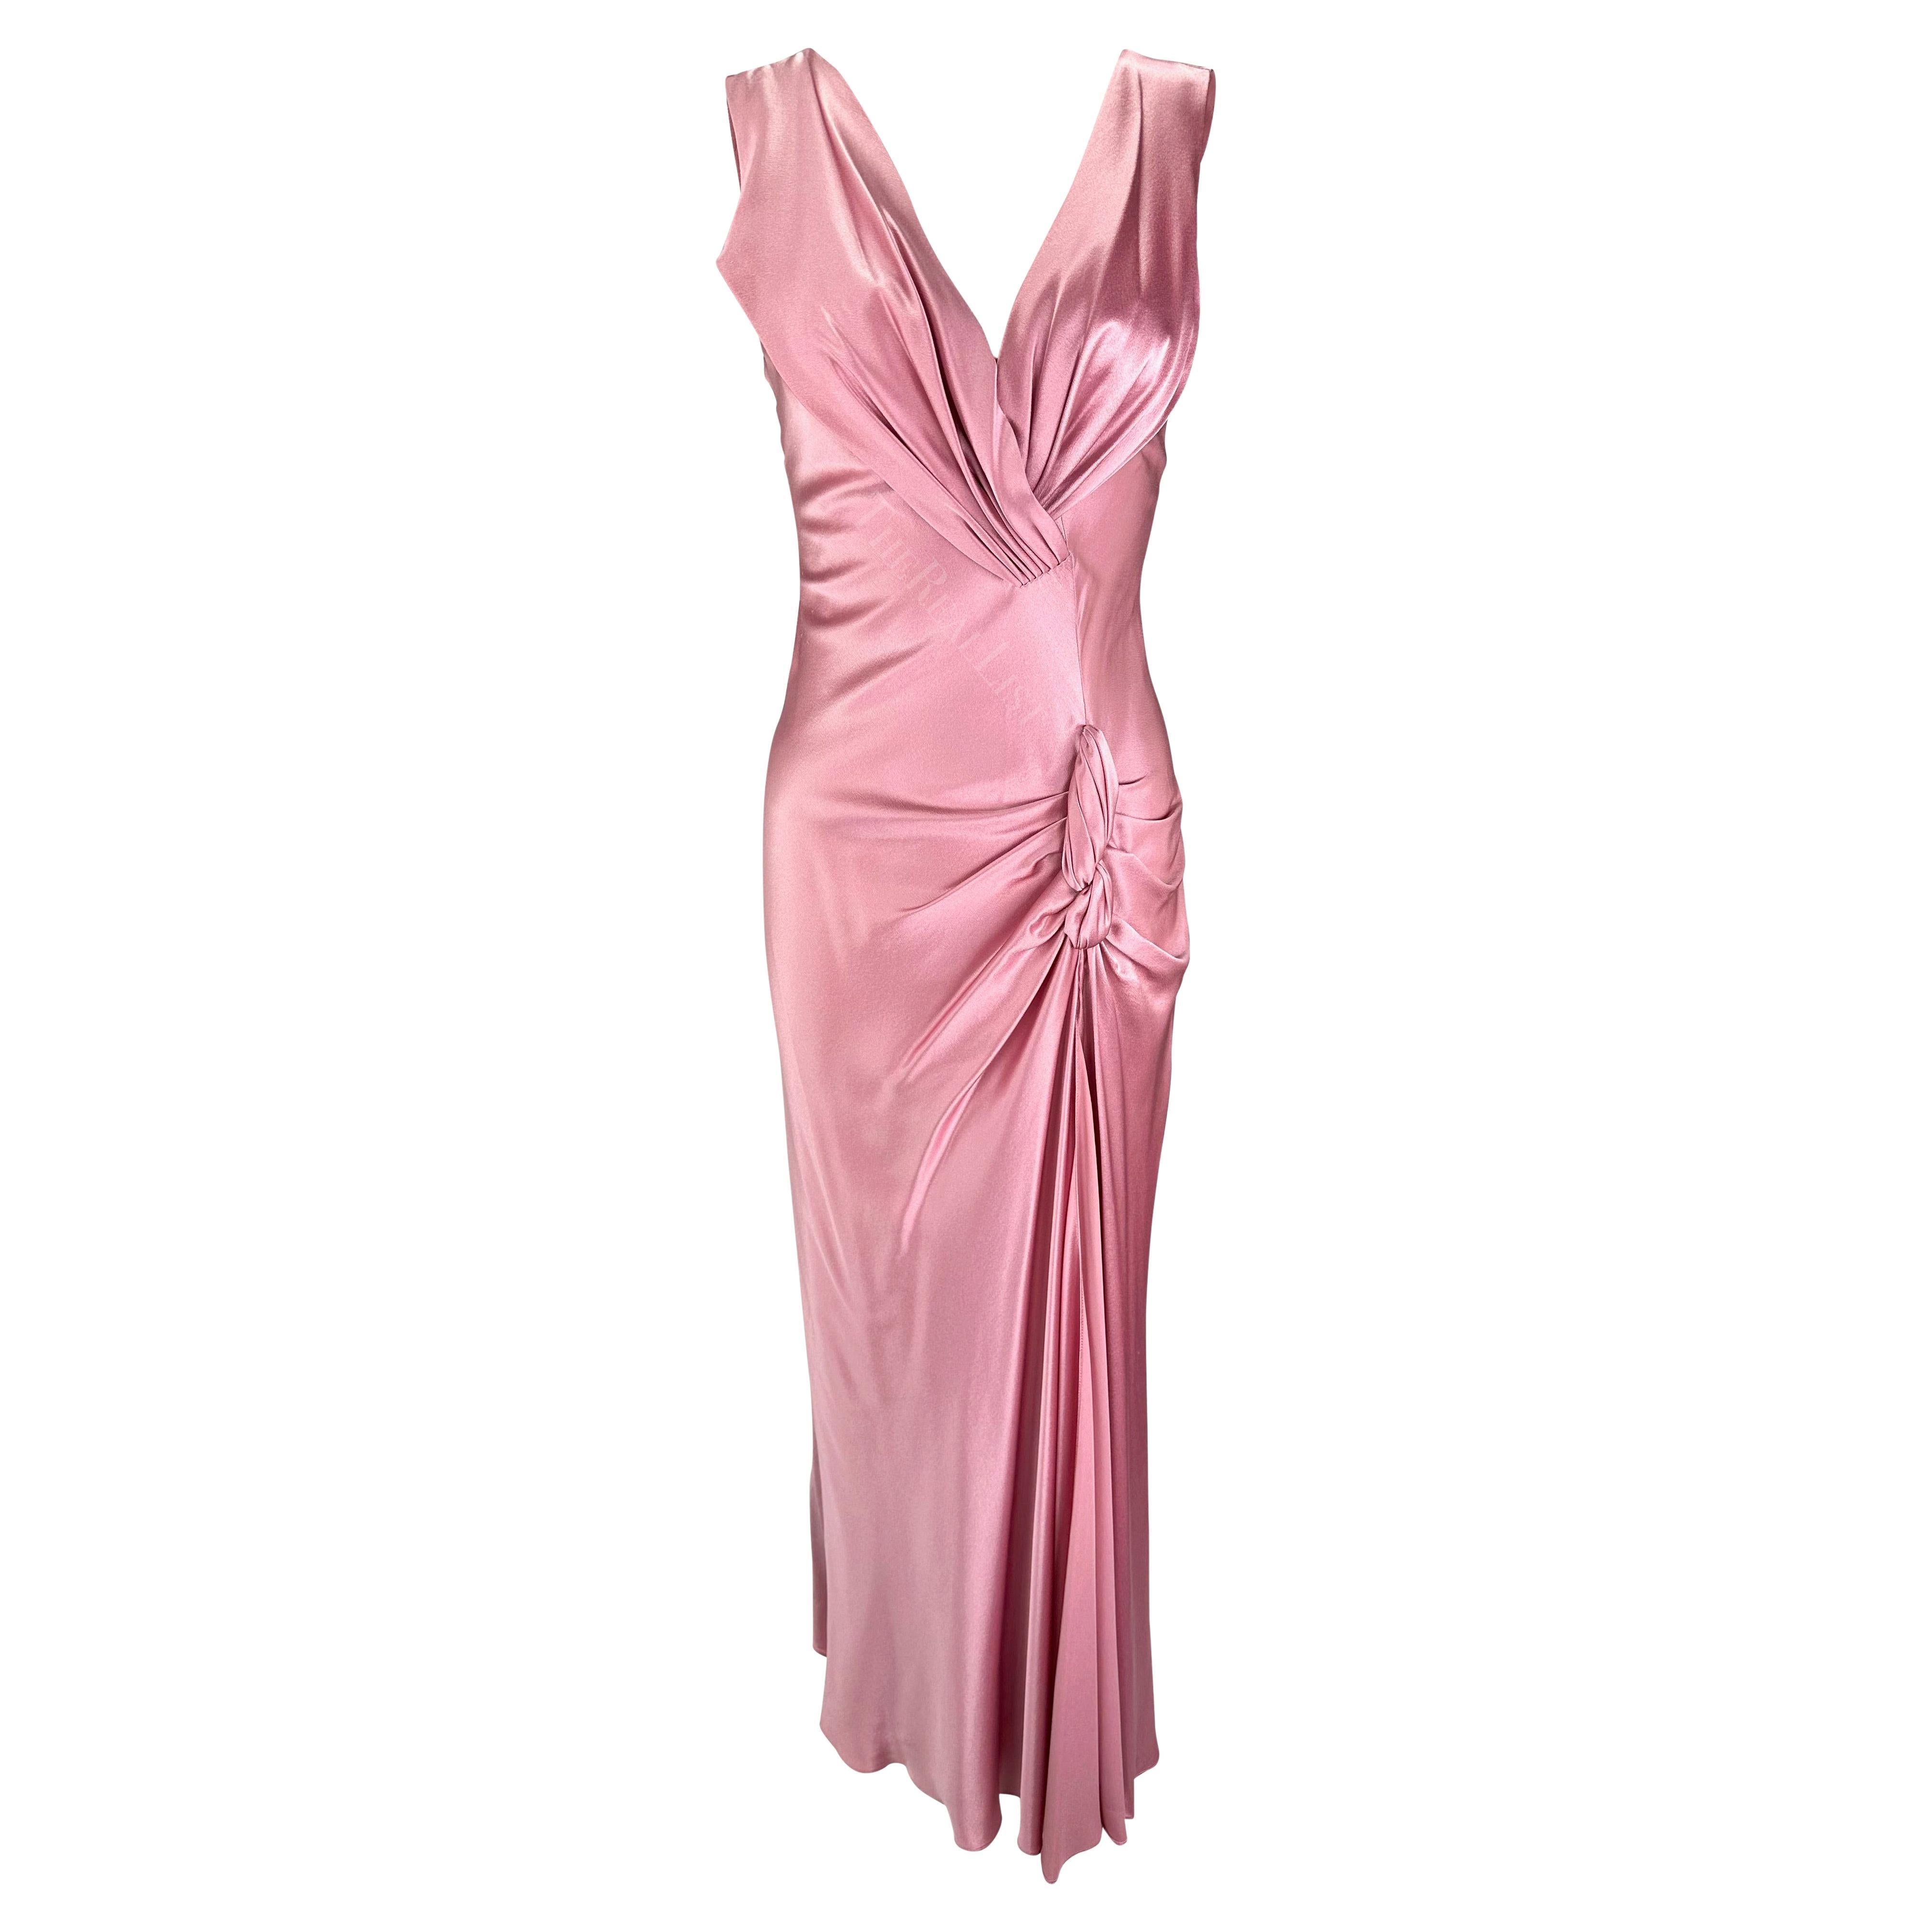 Presenting an incredible light pink Christian Dior gown, designed by John Galliano. From the Fall/Winter 2003 collection, this gown showcases the luxurious allure of light pink silk satin. The sleeveless design, adorned with a deep v-neckline and